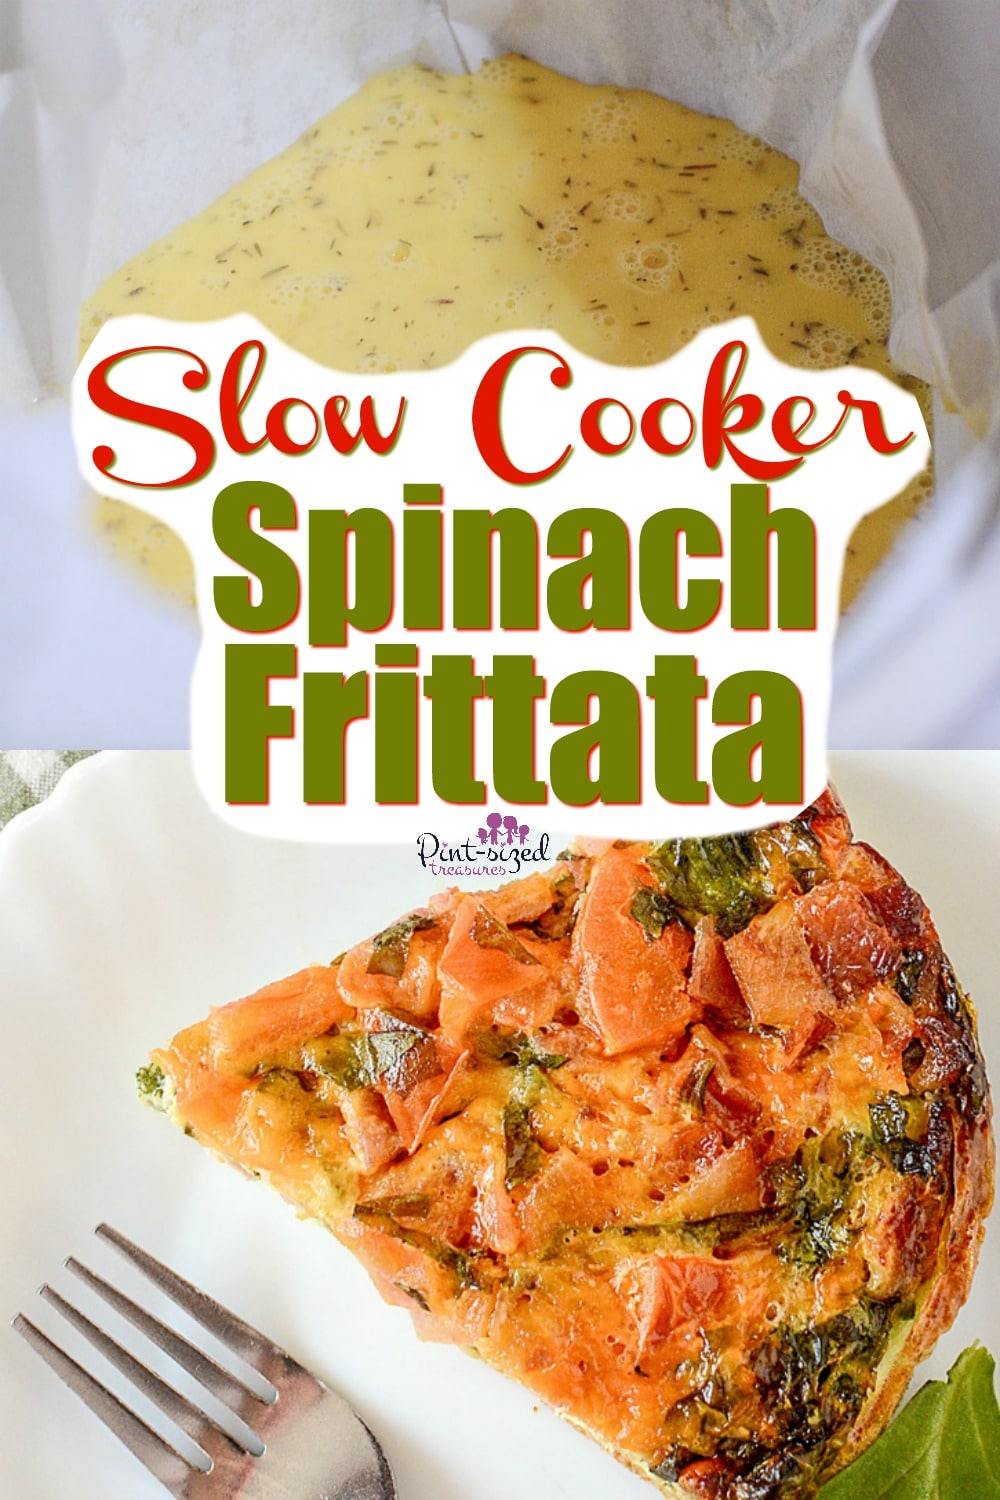 This slow cooker spinach frittata recipe is a simple, crustless quiche that's packed with flavors, seasonings and made in your crock pot!